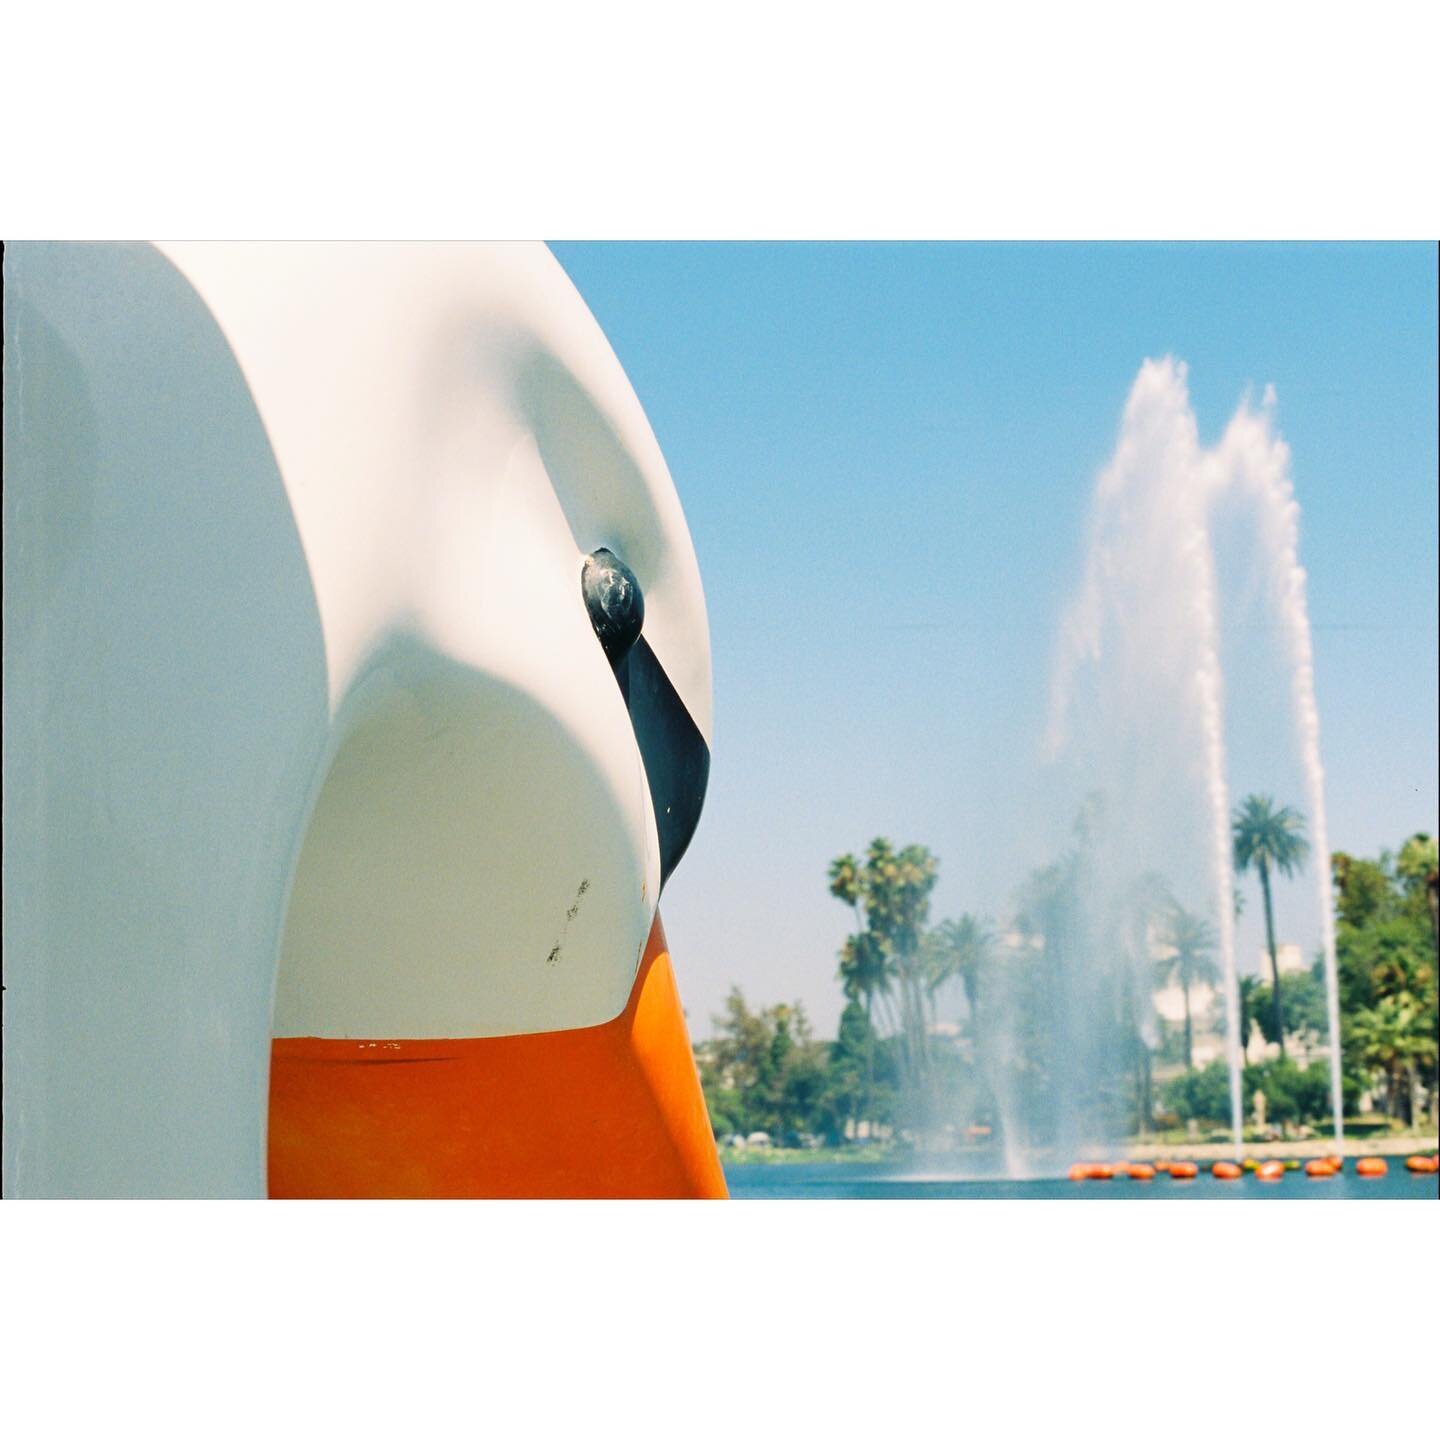 Great day for a paddle
#swan #paddelboat #waterfall #echopark #film #olympus #om10 #portra400 #35mm